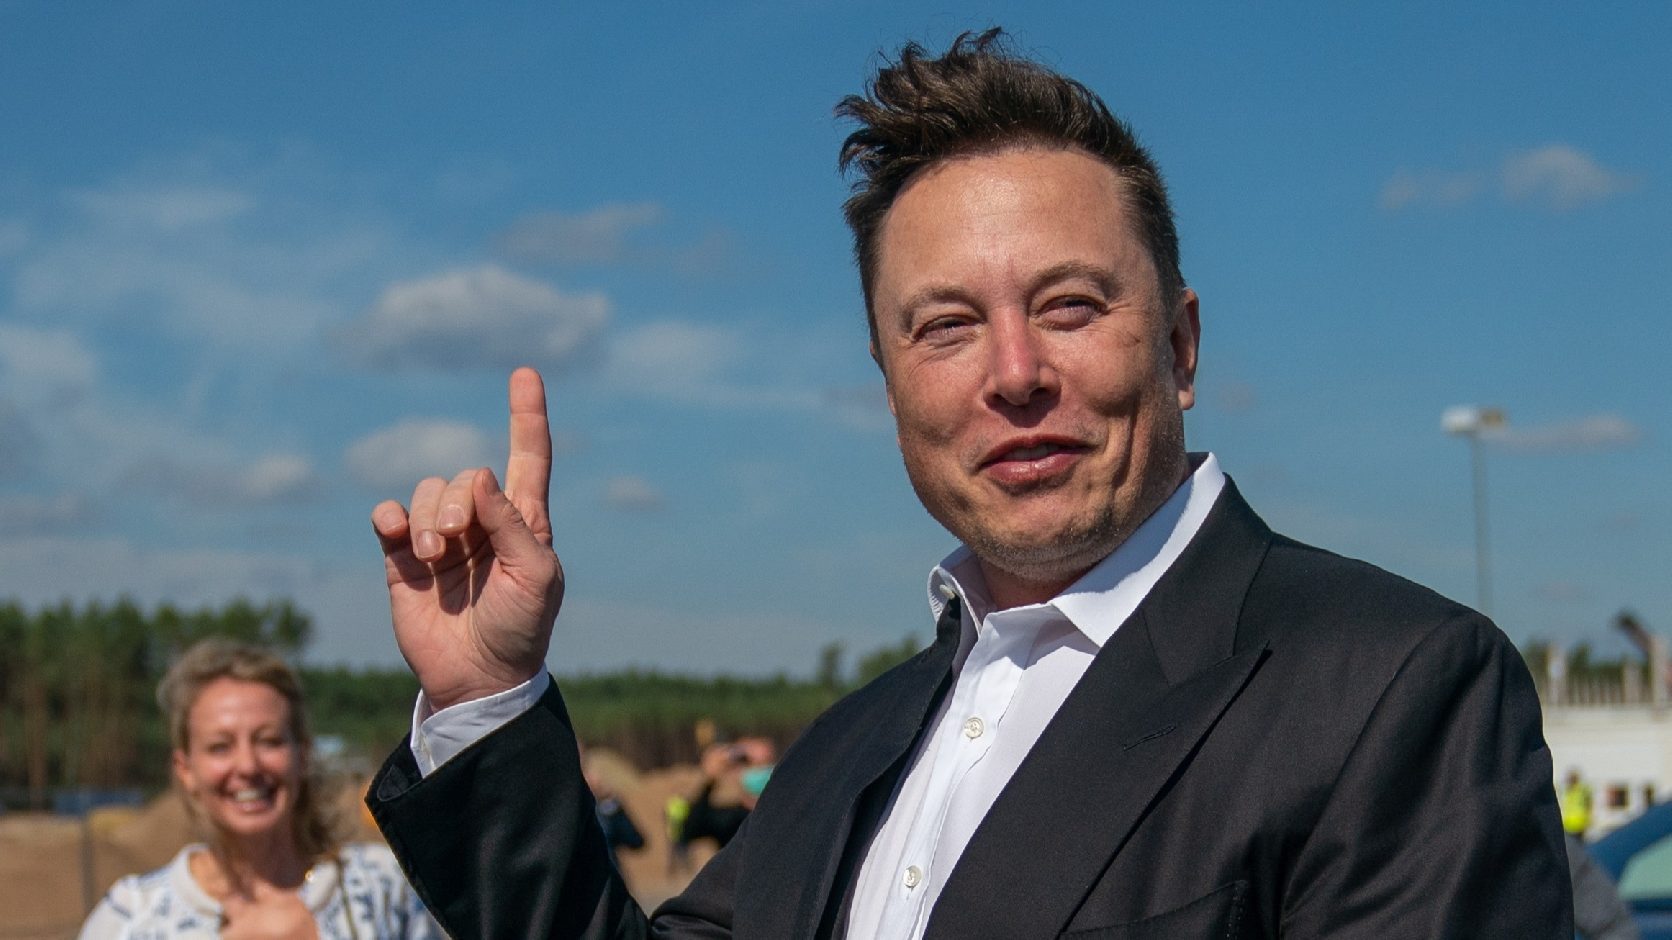 According to Chinese "Forbes", musk is also the richest man in the world